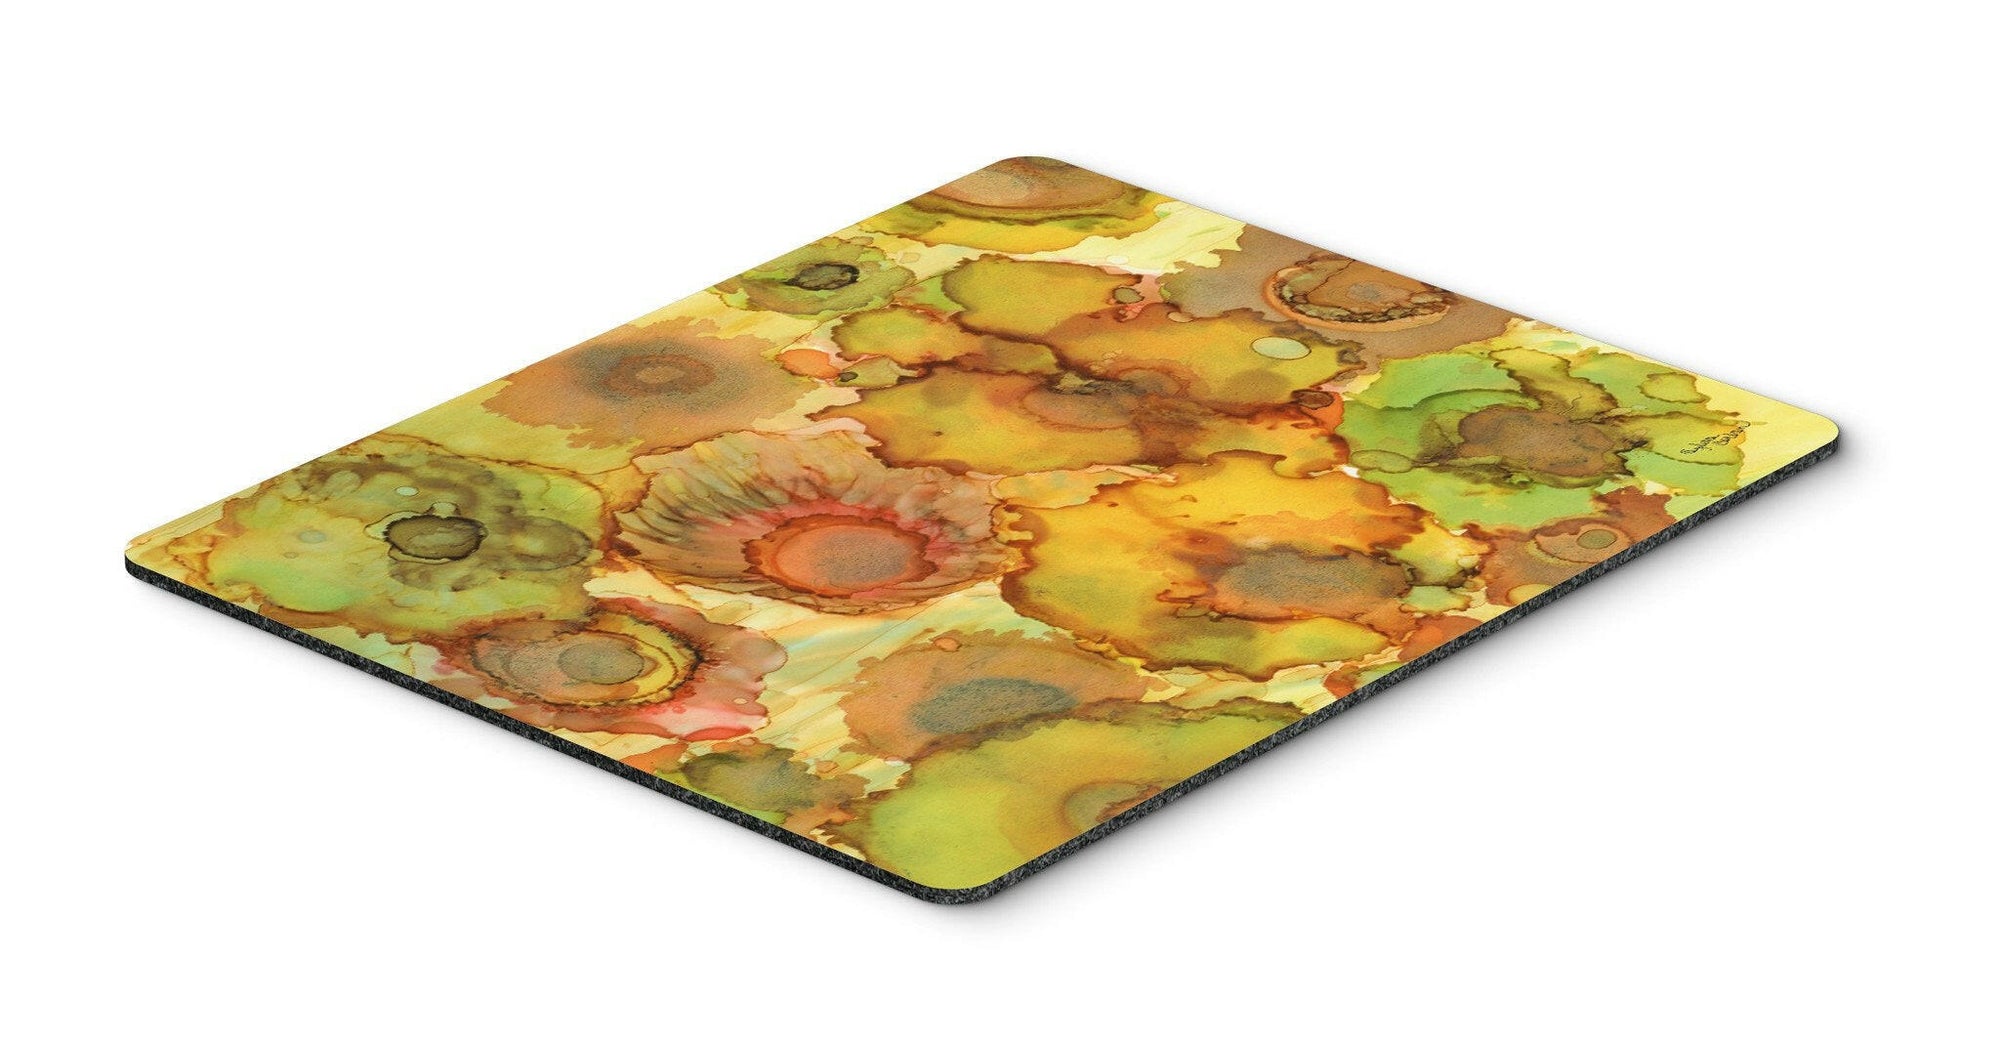 Abstract Flowers in Yellows and Oranges Mouse Pad, Hot Pad or Trivet 8986MP by Caroline's Treasures